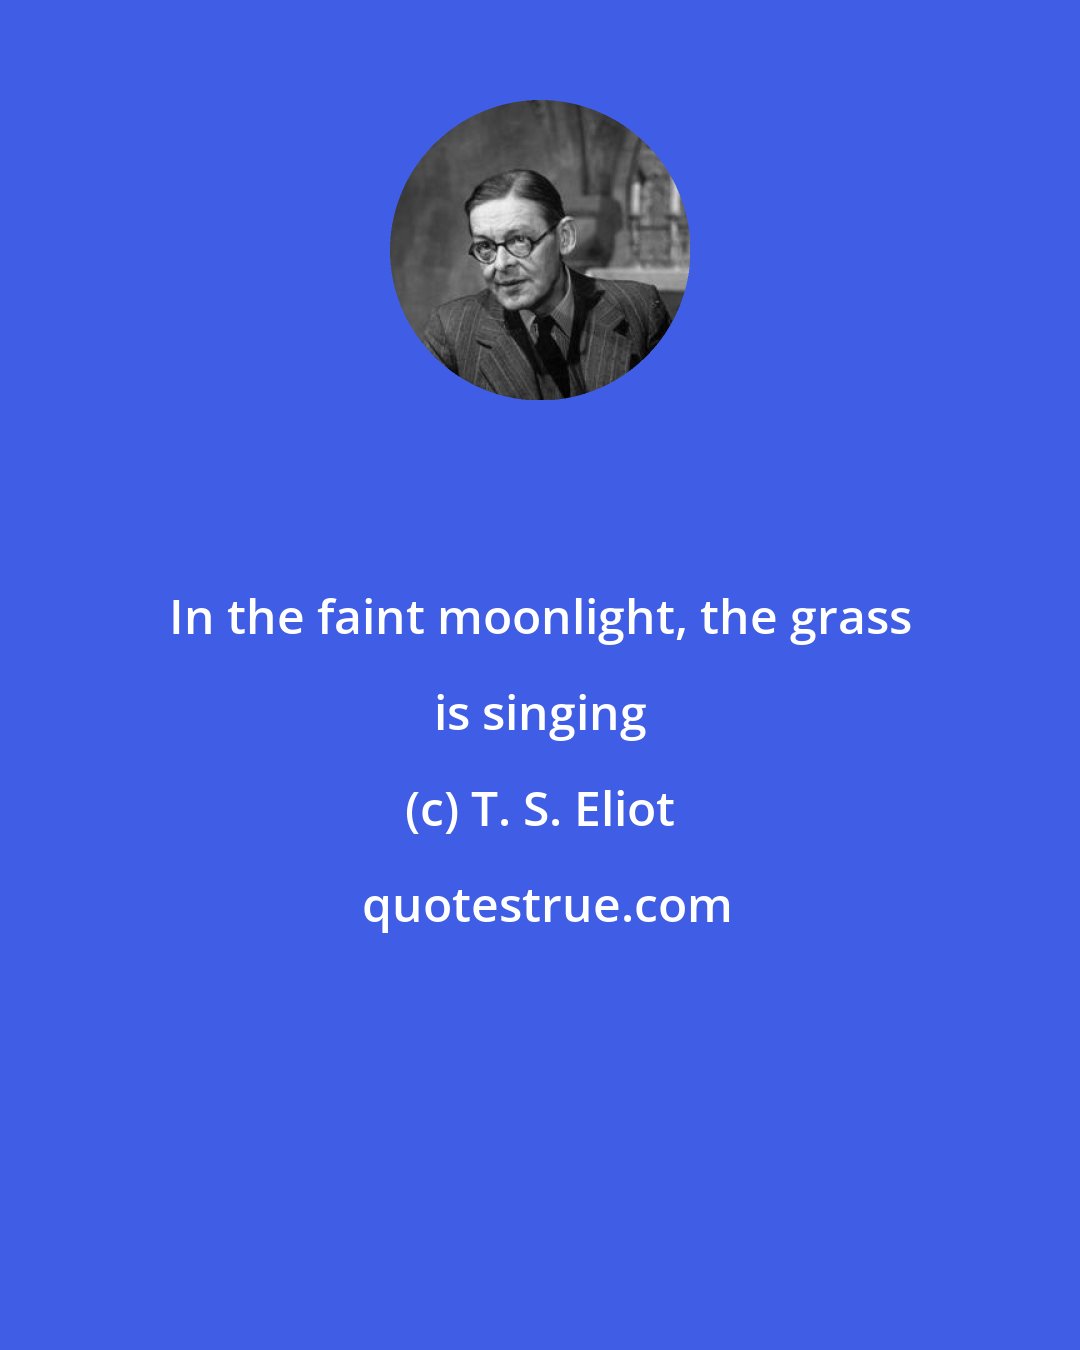 T. S. Eliot: In the faint moonlight, the grass is singing